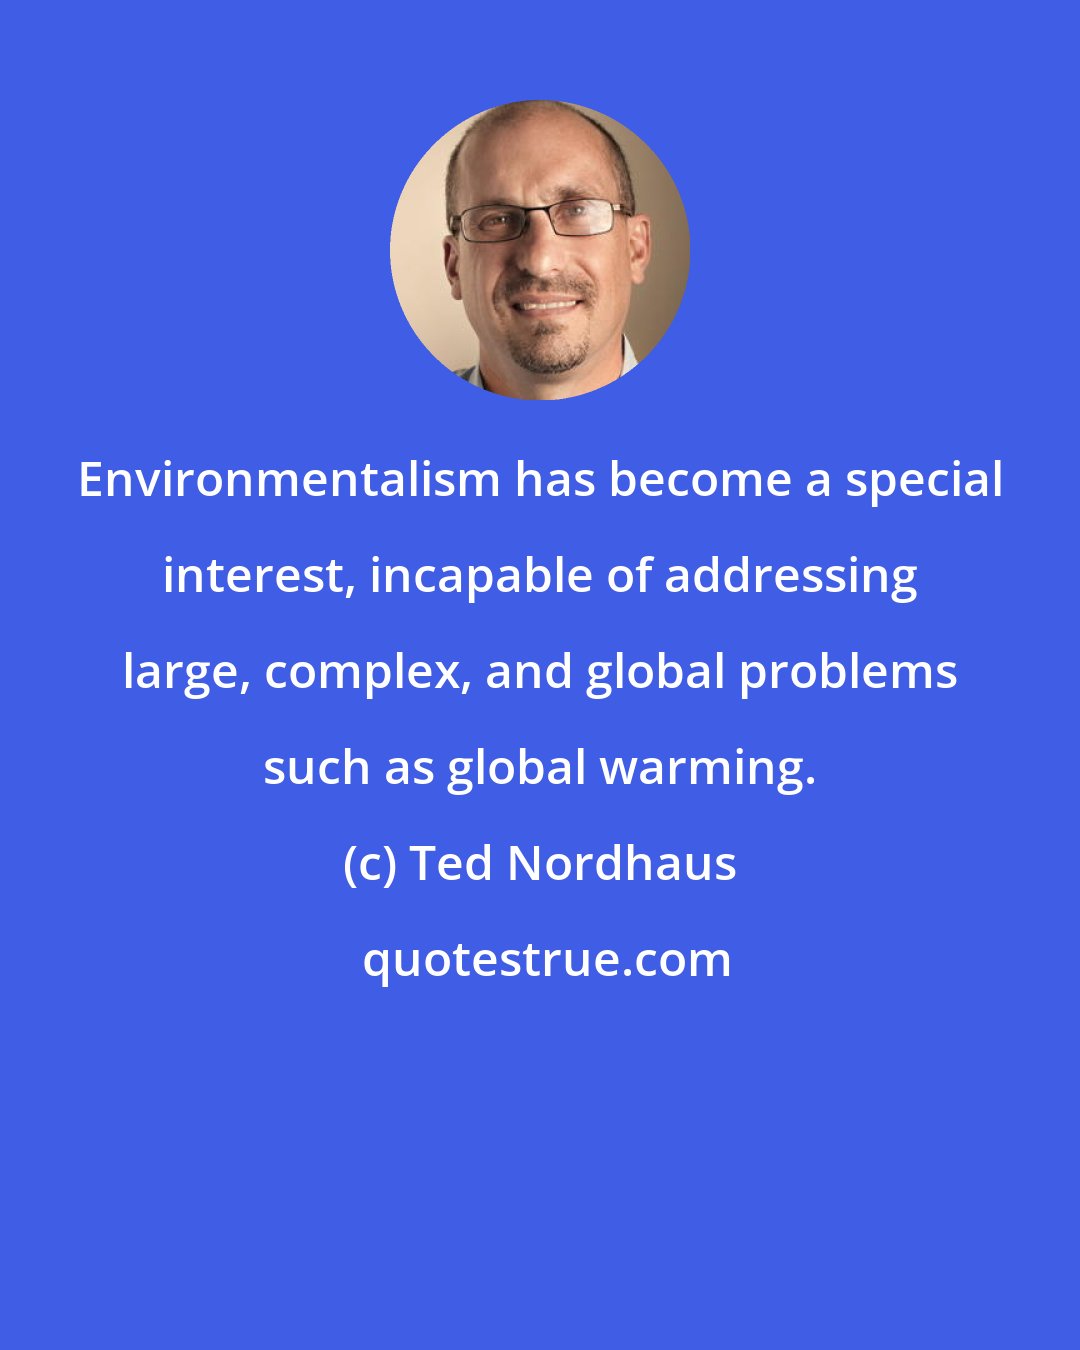 Ted Nordhaus: Environmentalism has become a special interest, incapable of addressing large, complex, and global problems such as global warming.